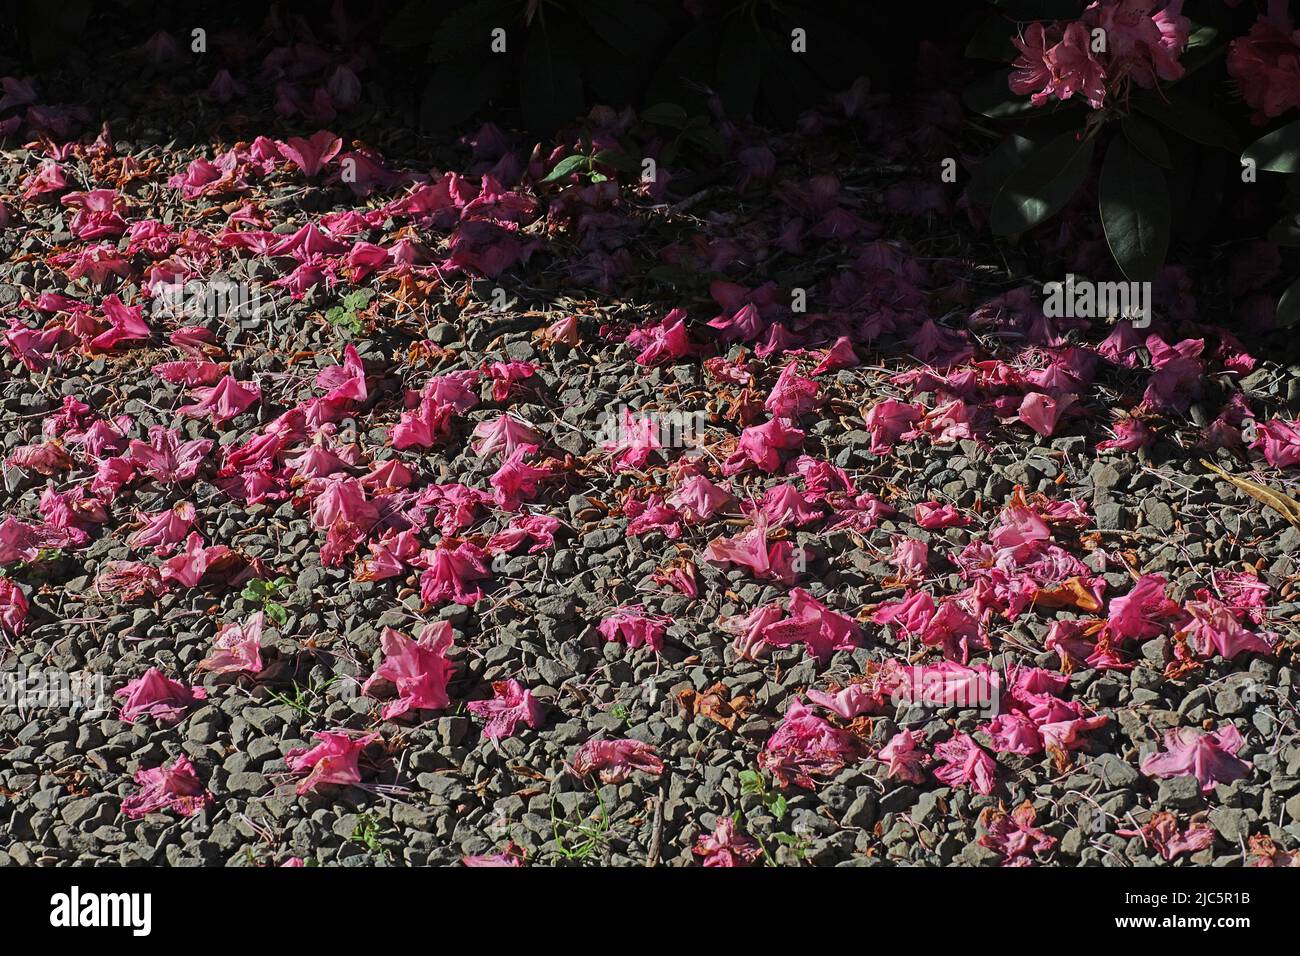 Fallen petals from a Rhododendron. Stock Photo